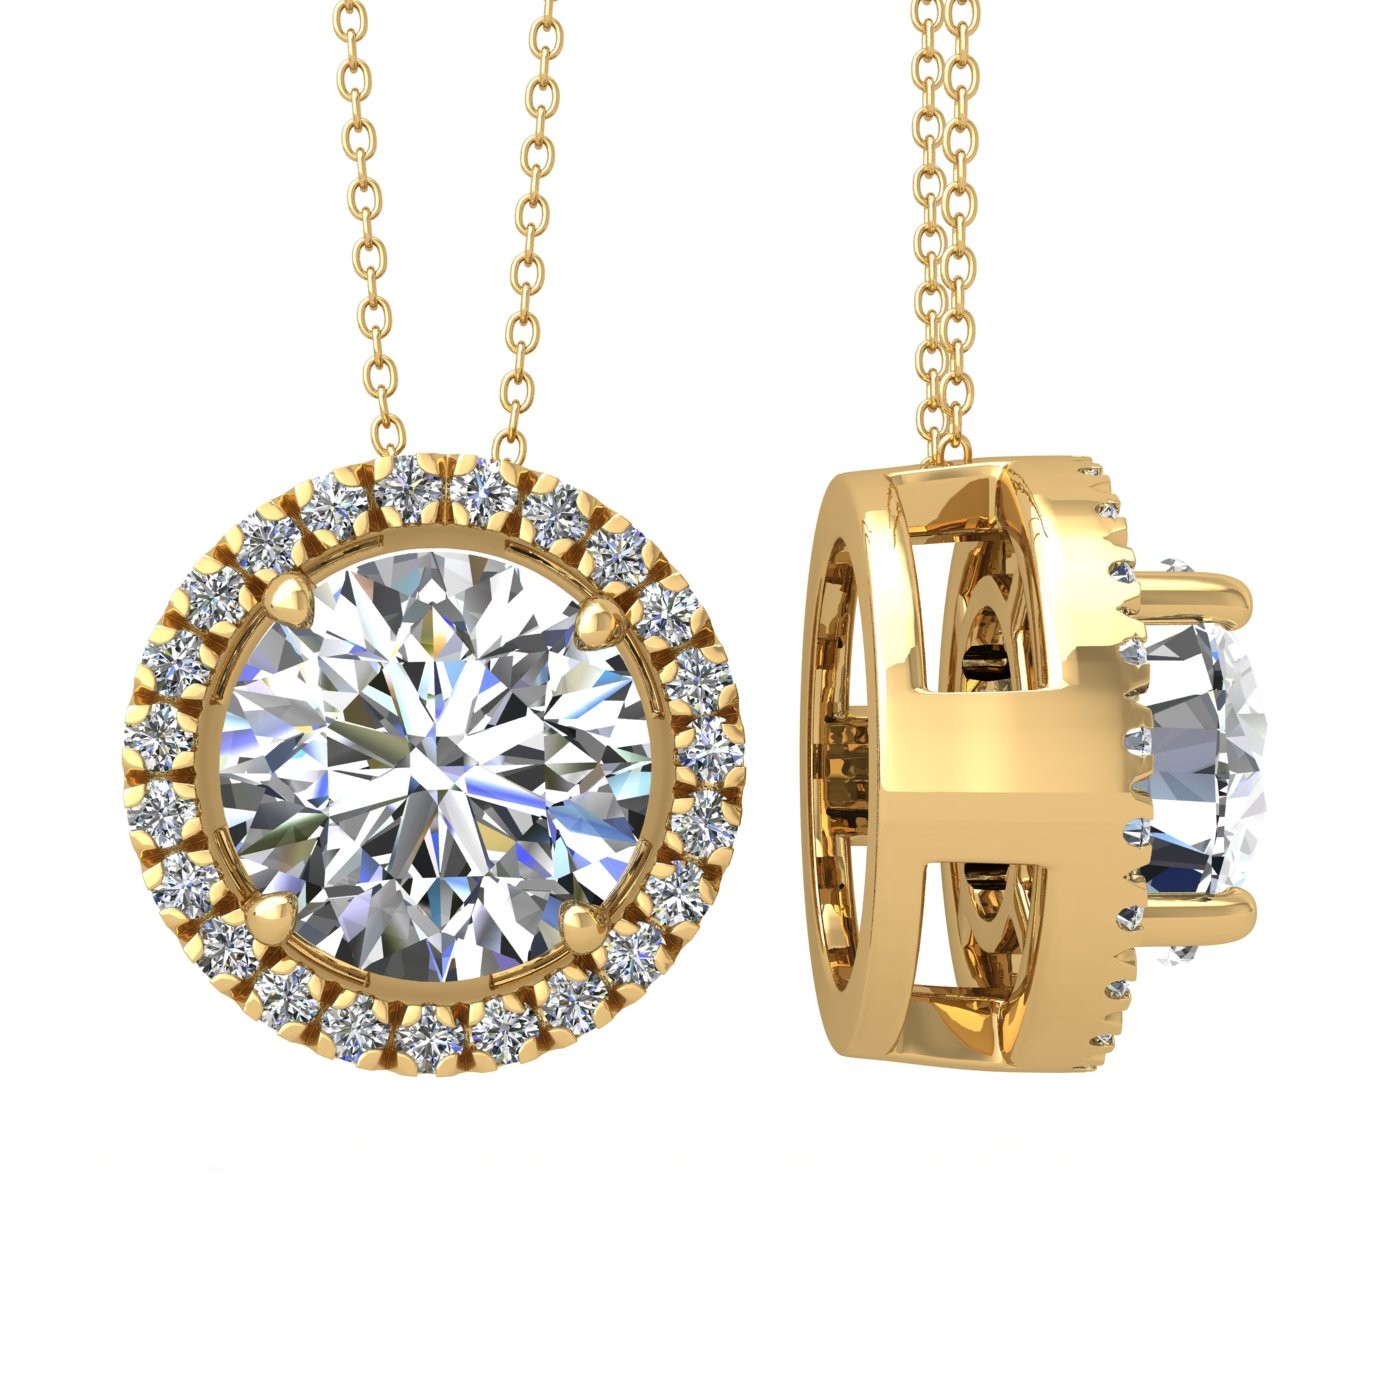 18k yellow gold 2,5 ct 4 prong round shape diamond pendant with diamond pavÉ set halo including chain seperate from the pendant Photos & images